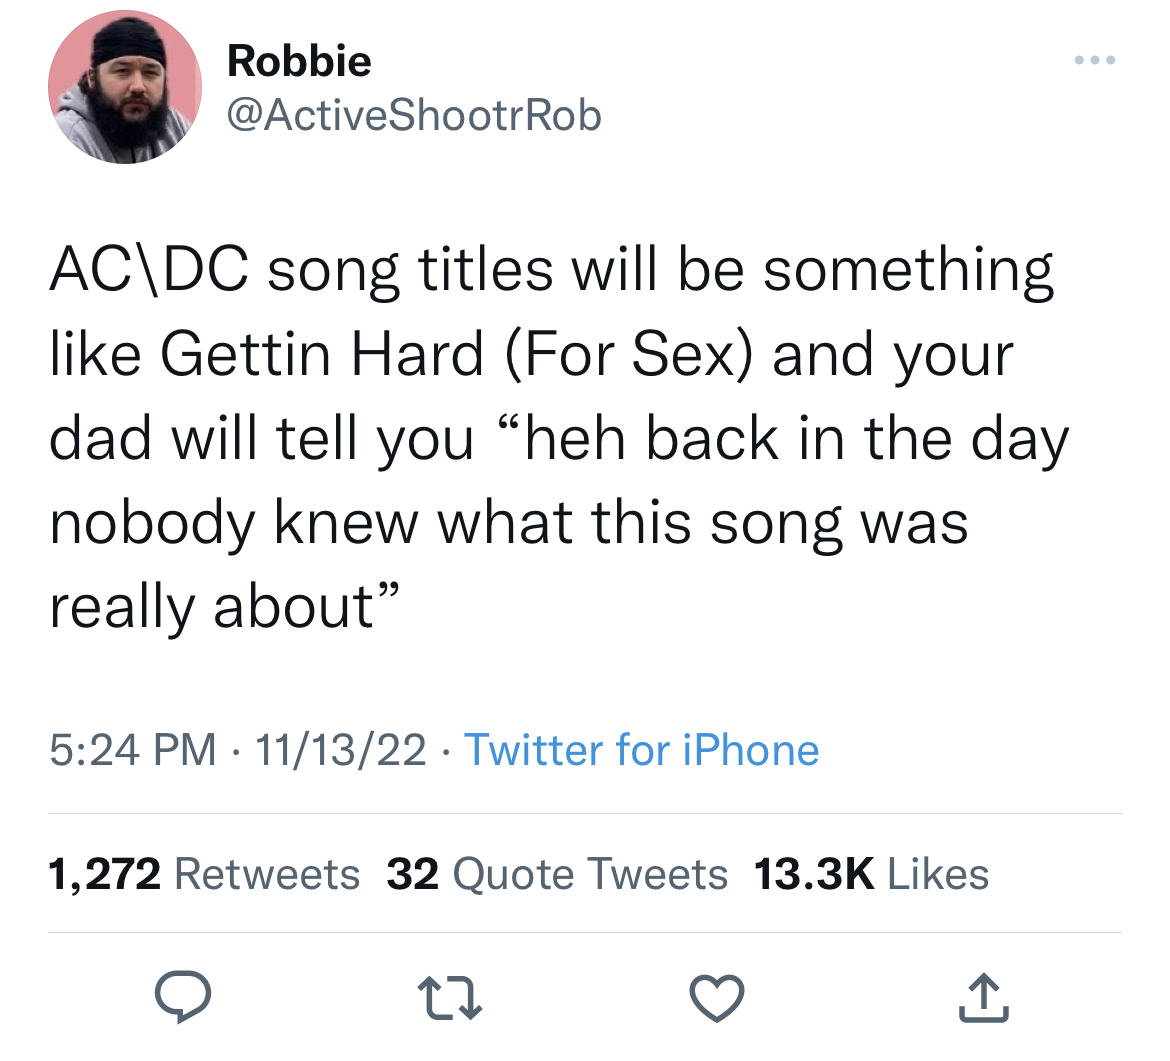 Tweets dunking on celebs - Miloslav Rozner - Robbie Rob Ac\Dc song titles will be something Gettin Hard For Sex and your dad will tell you "heh back in the day nobody knew what this song was really about" 111322 Twitter for iPhone 1,272 32 Quote Tweets